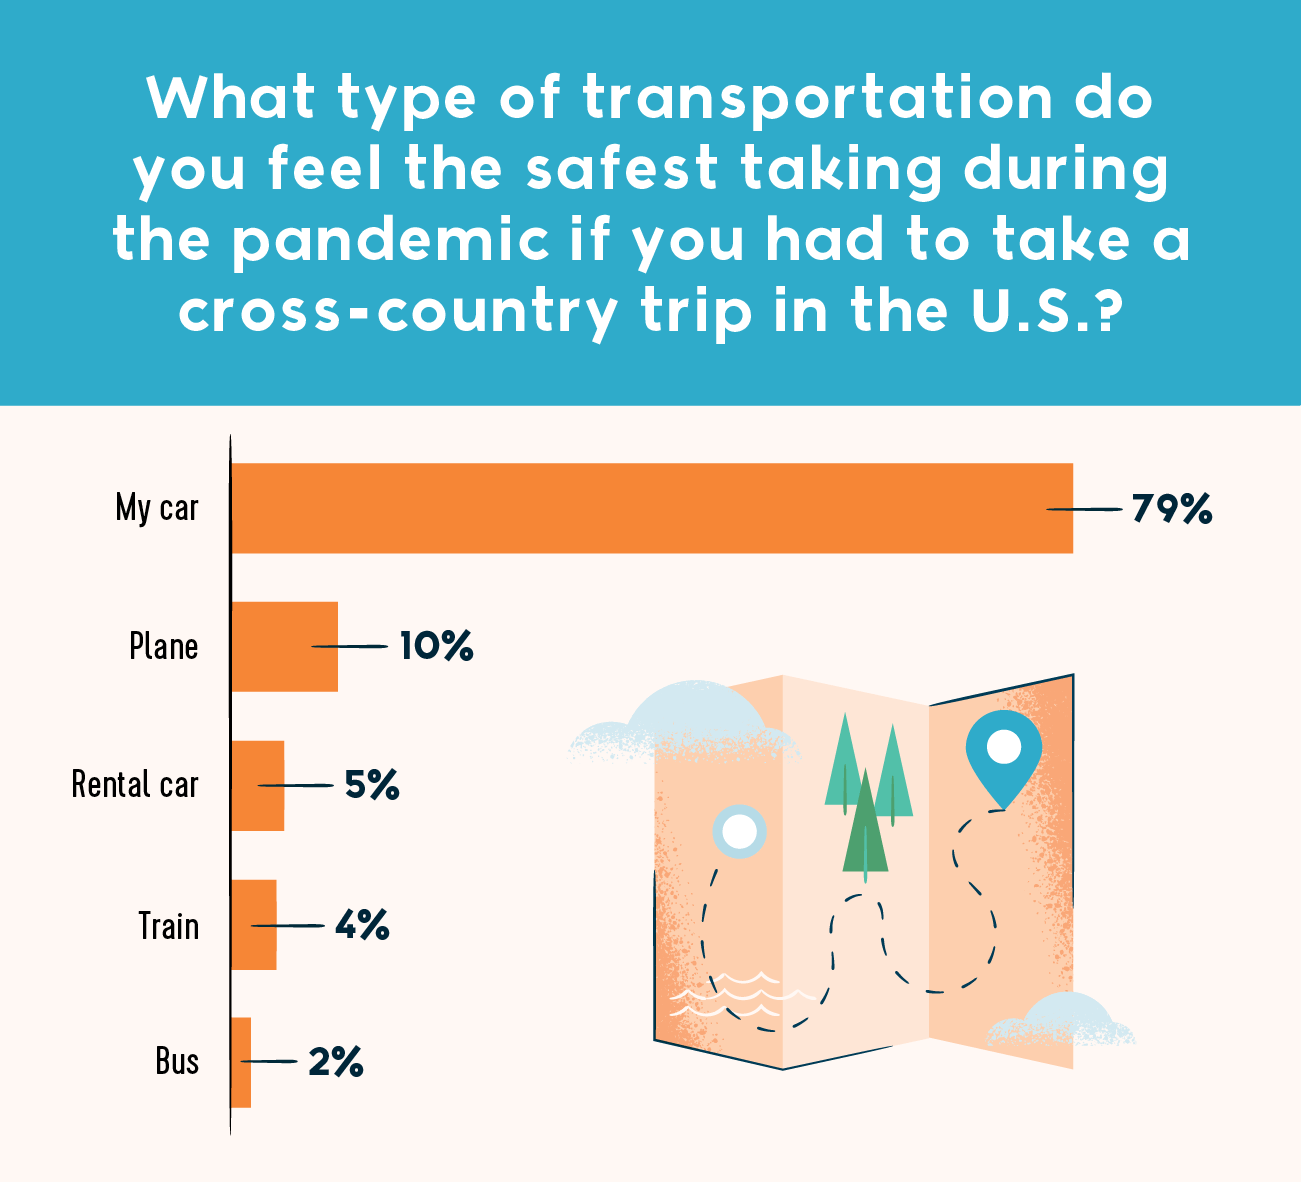 what type of transportation do you feel the safest taking during the pandemic if you had to take a cross-country tip in the u.s.